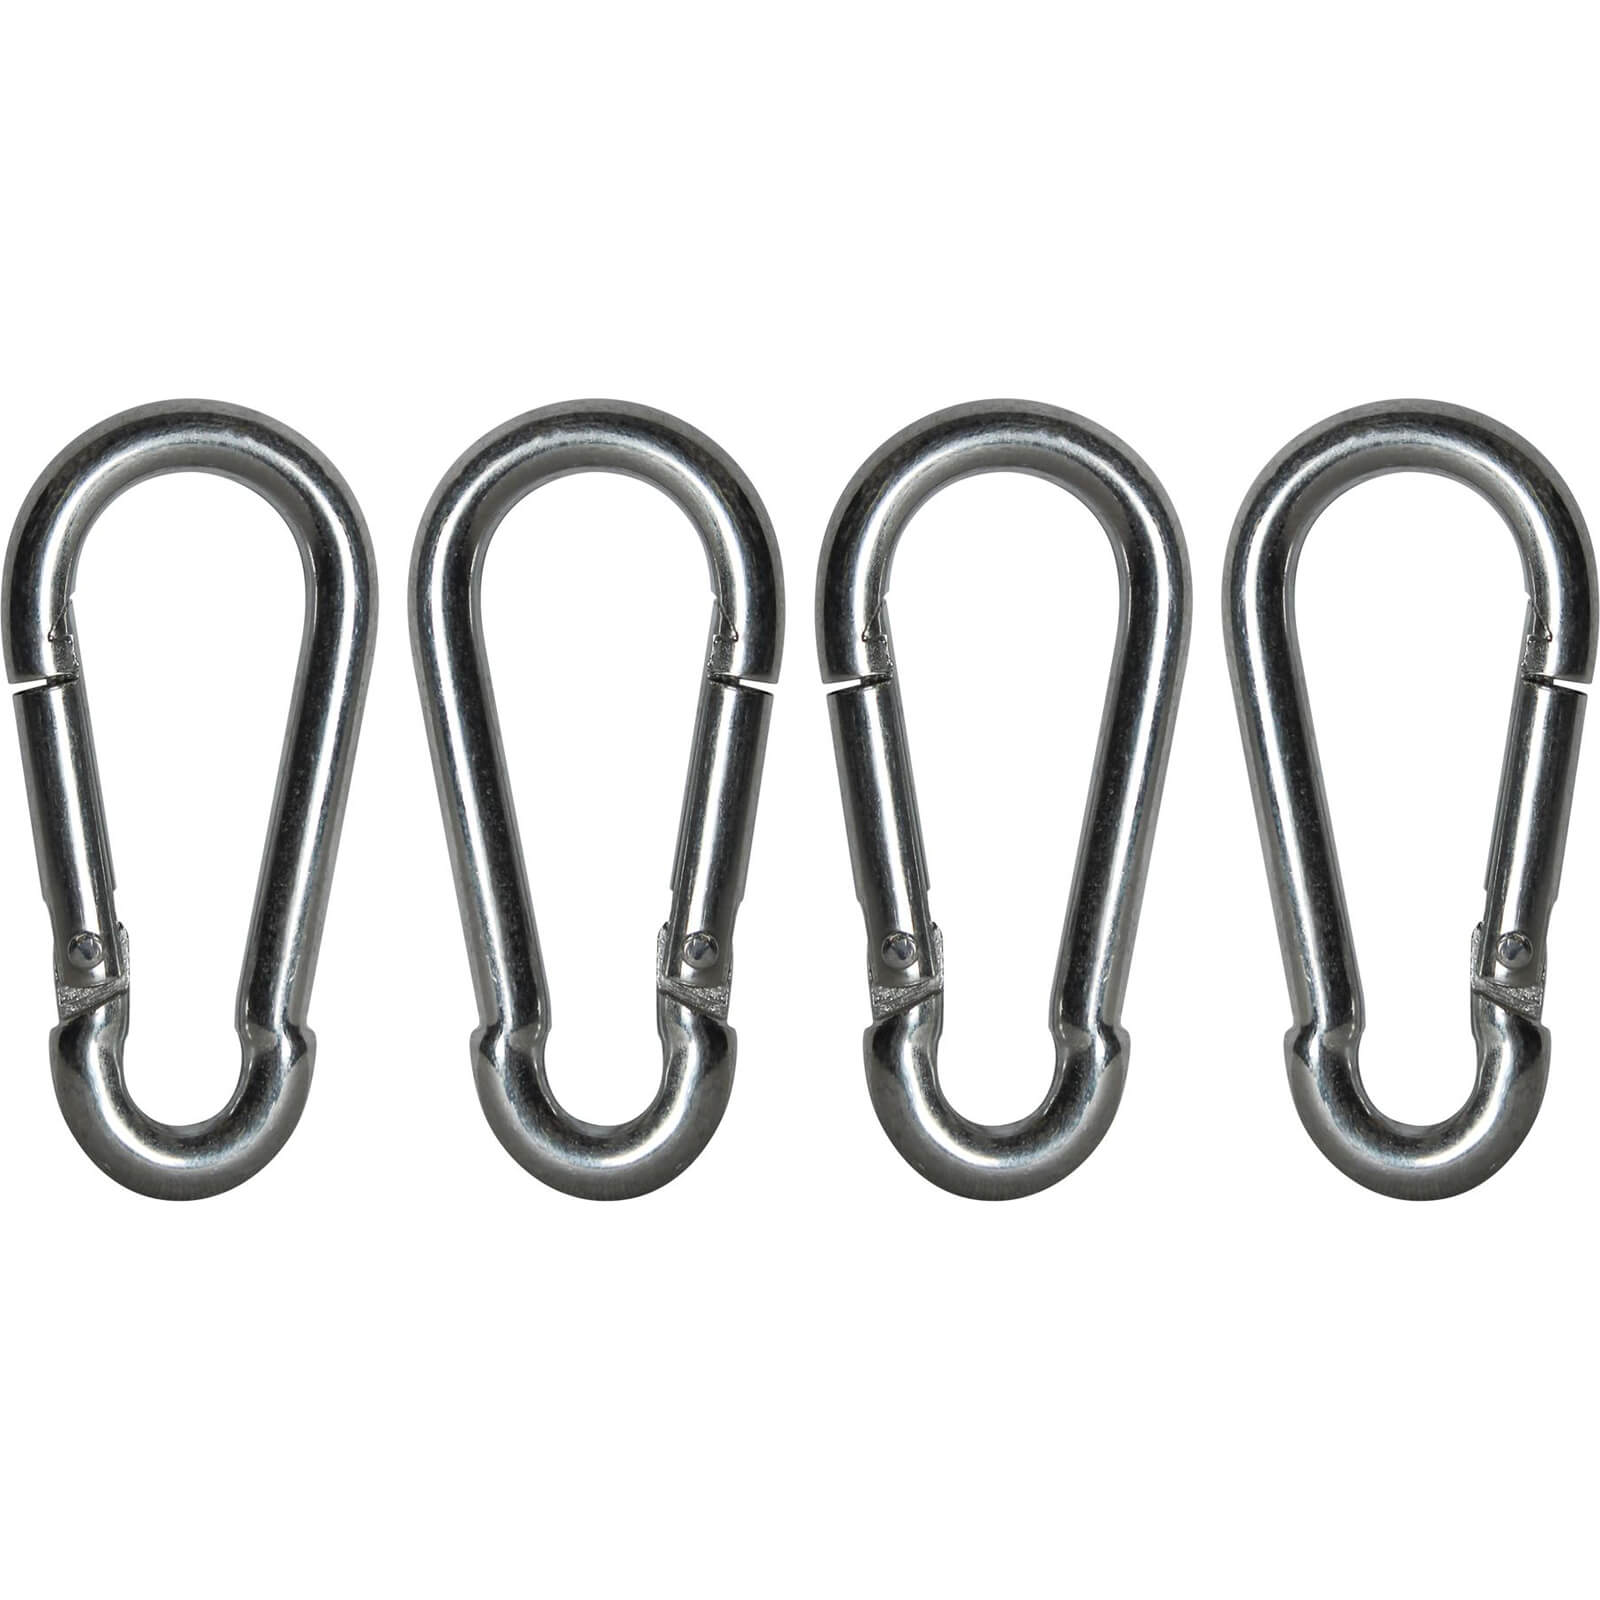 Image of Faithfull Zinc Plated Fire Brigade Snap Hook Carabiner 6mm Pack of 4